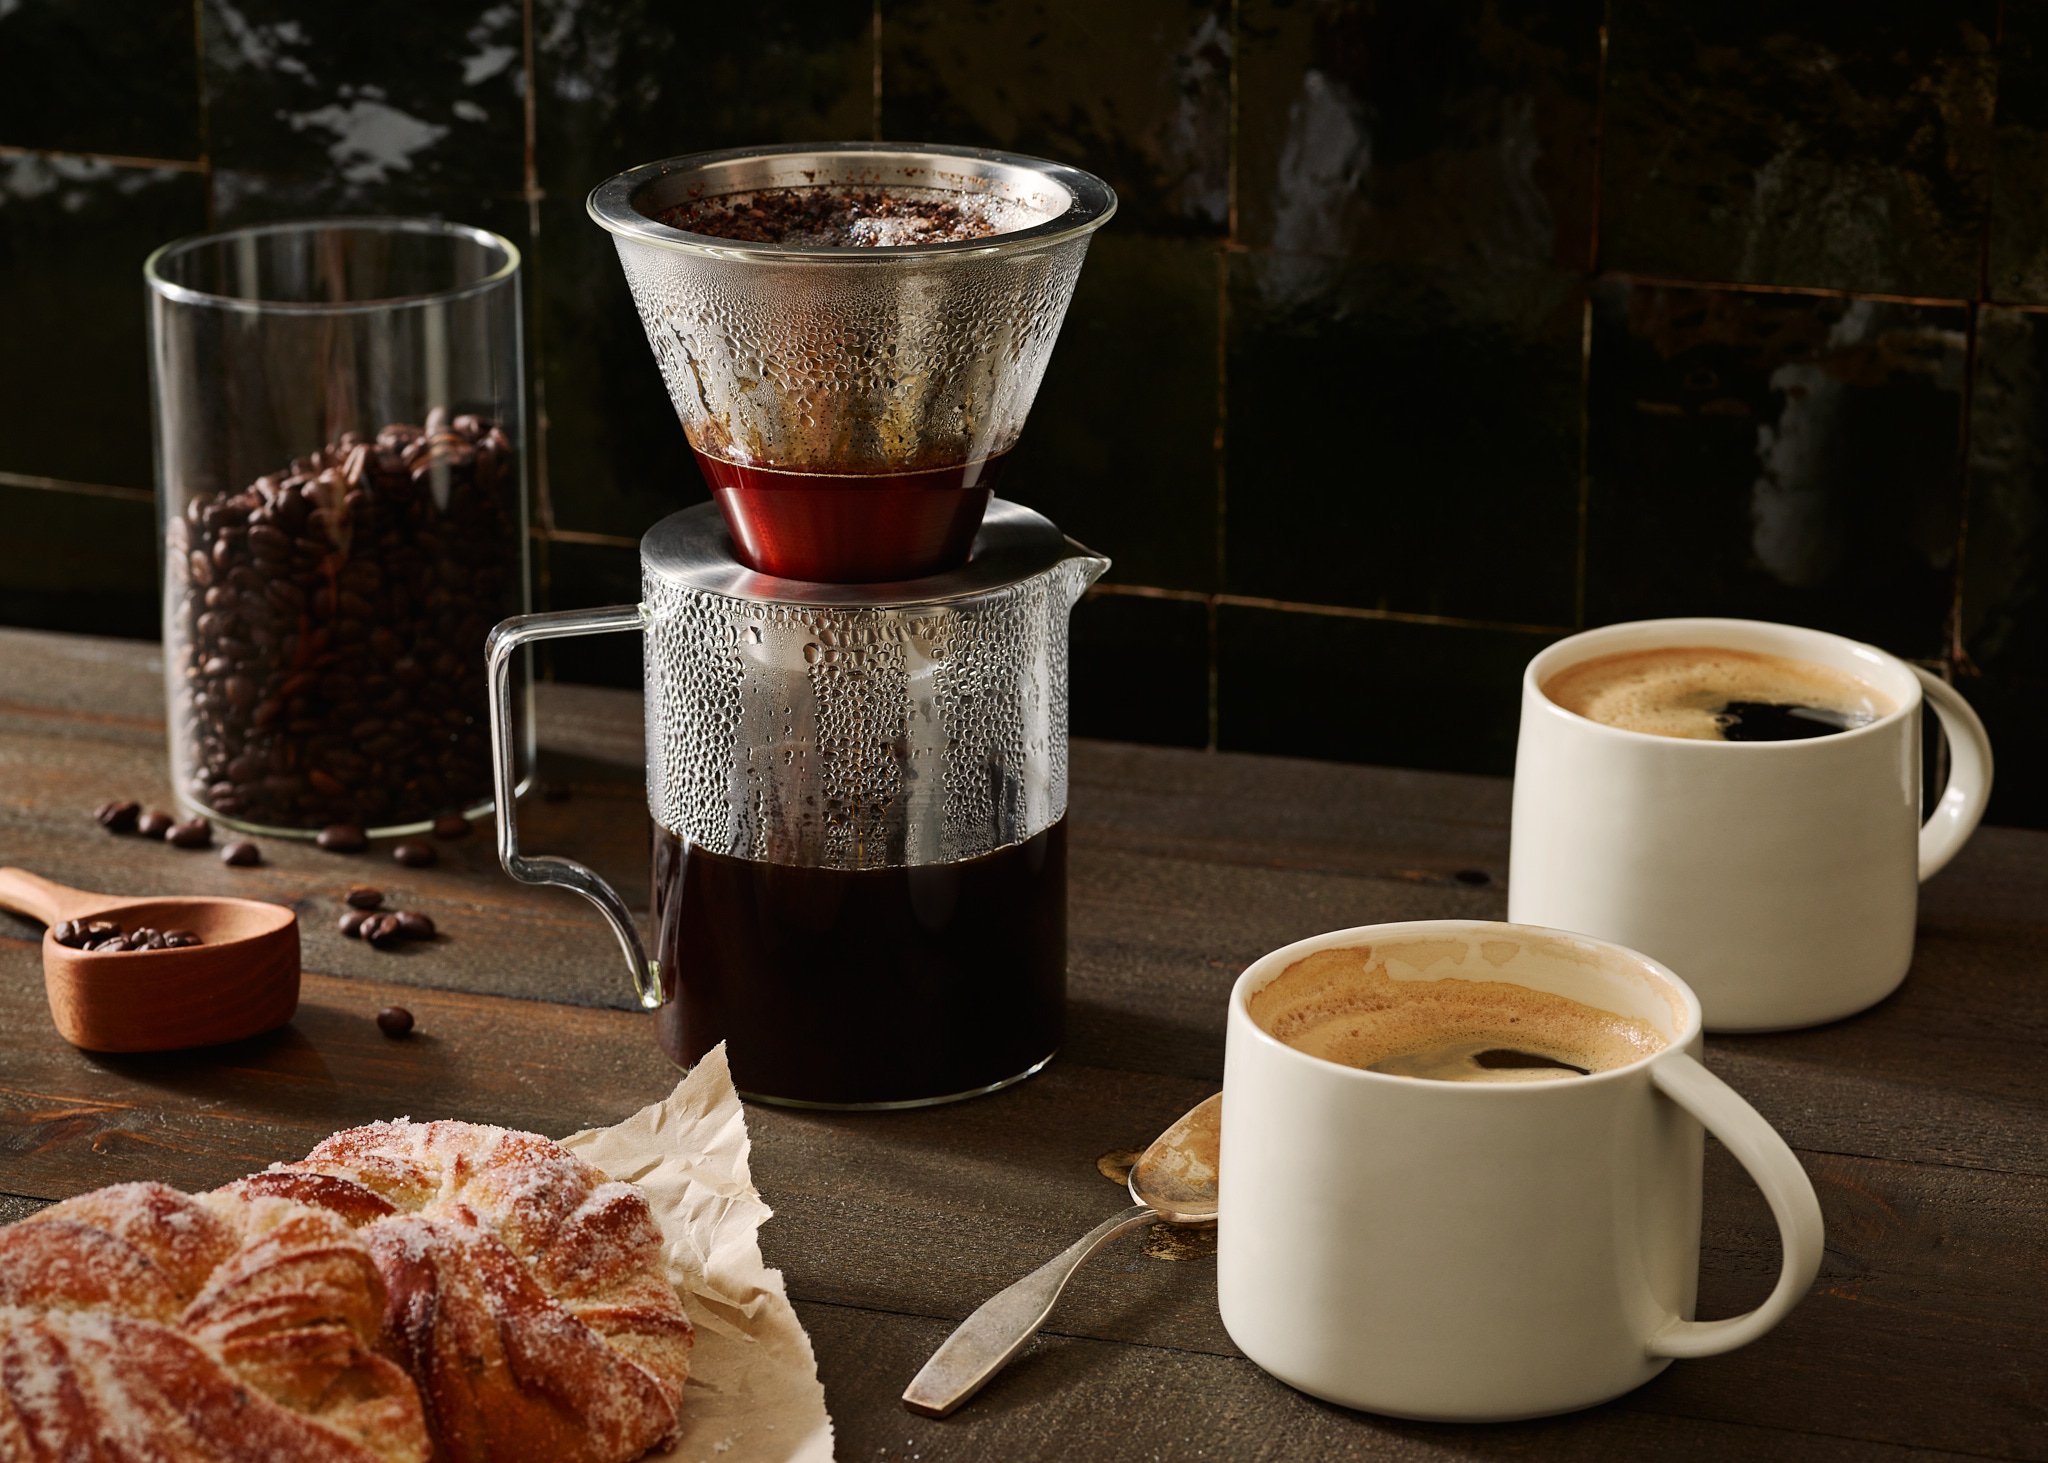 1-Pourover-Coffee-and-Pastry-0027-101722-R1-V2.jpg